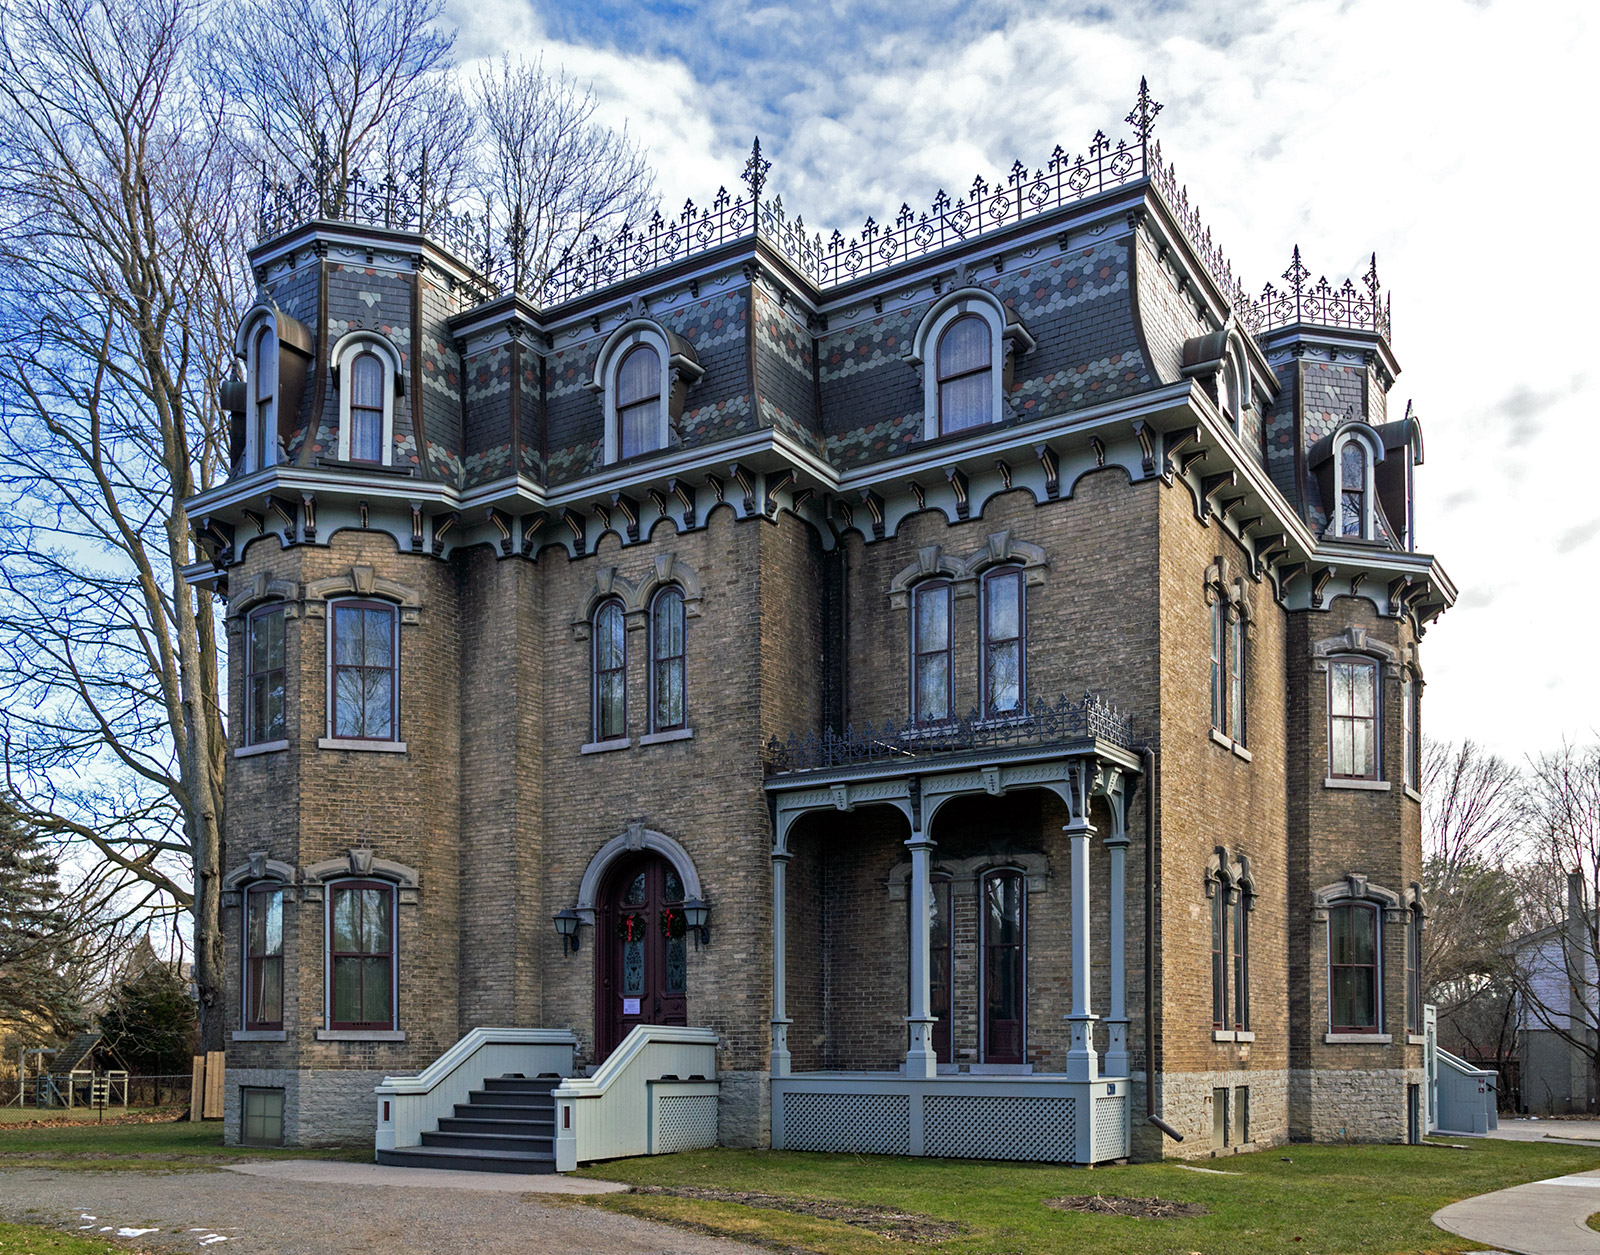 20141223. The Glanmore House (c.1883) in Belleville, Ontario is